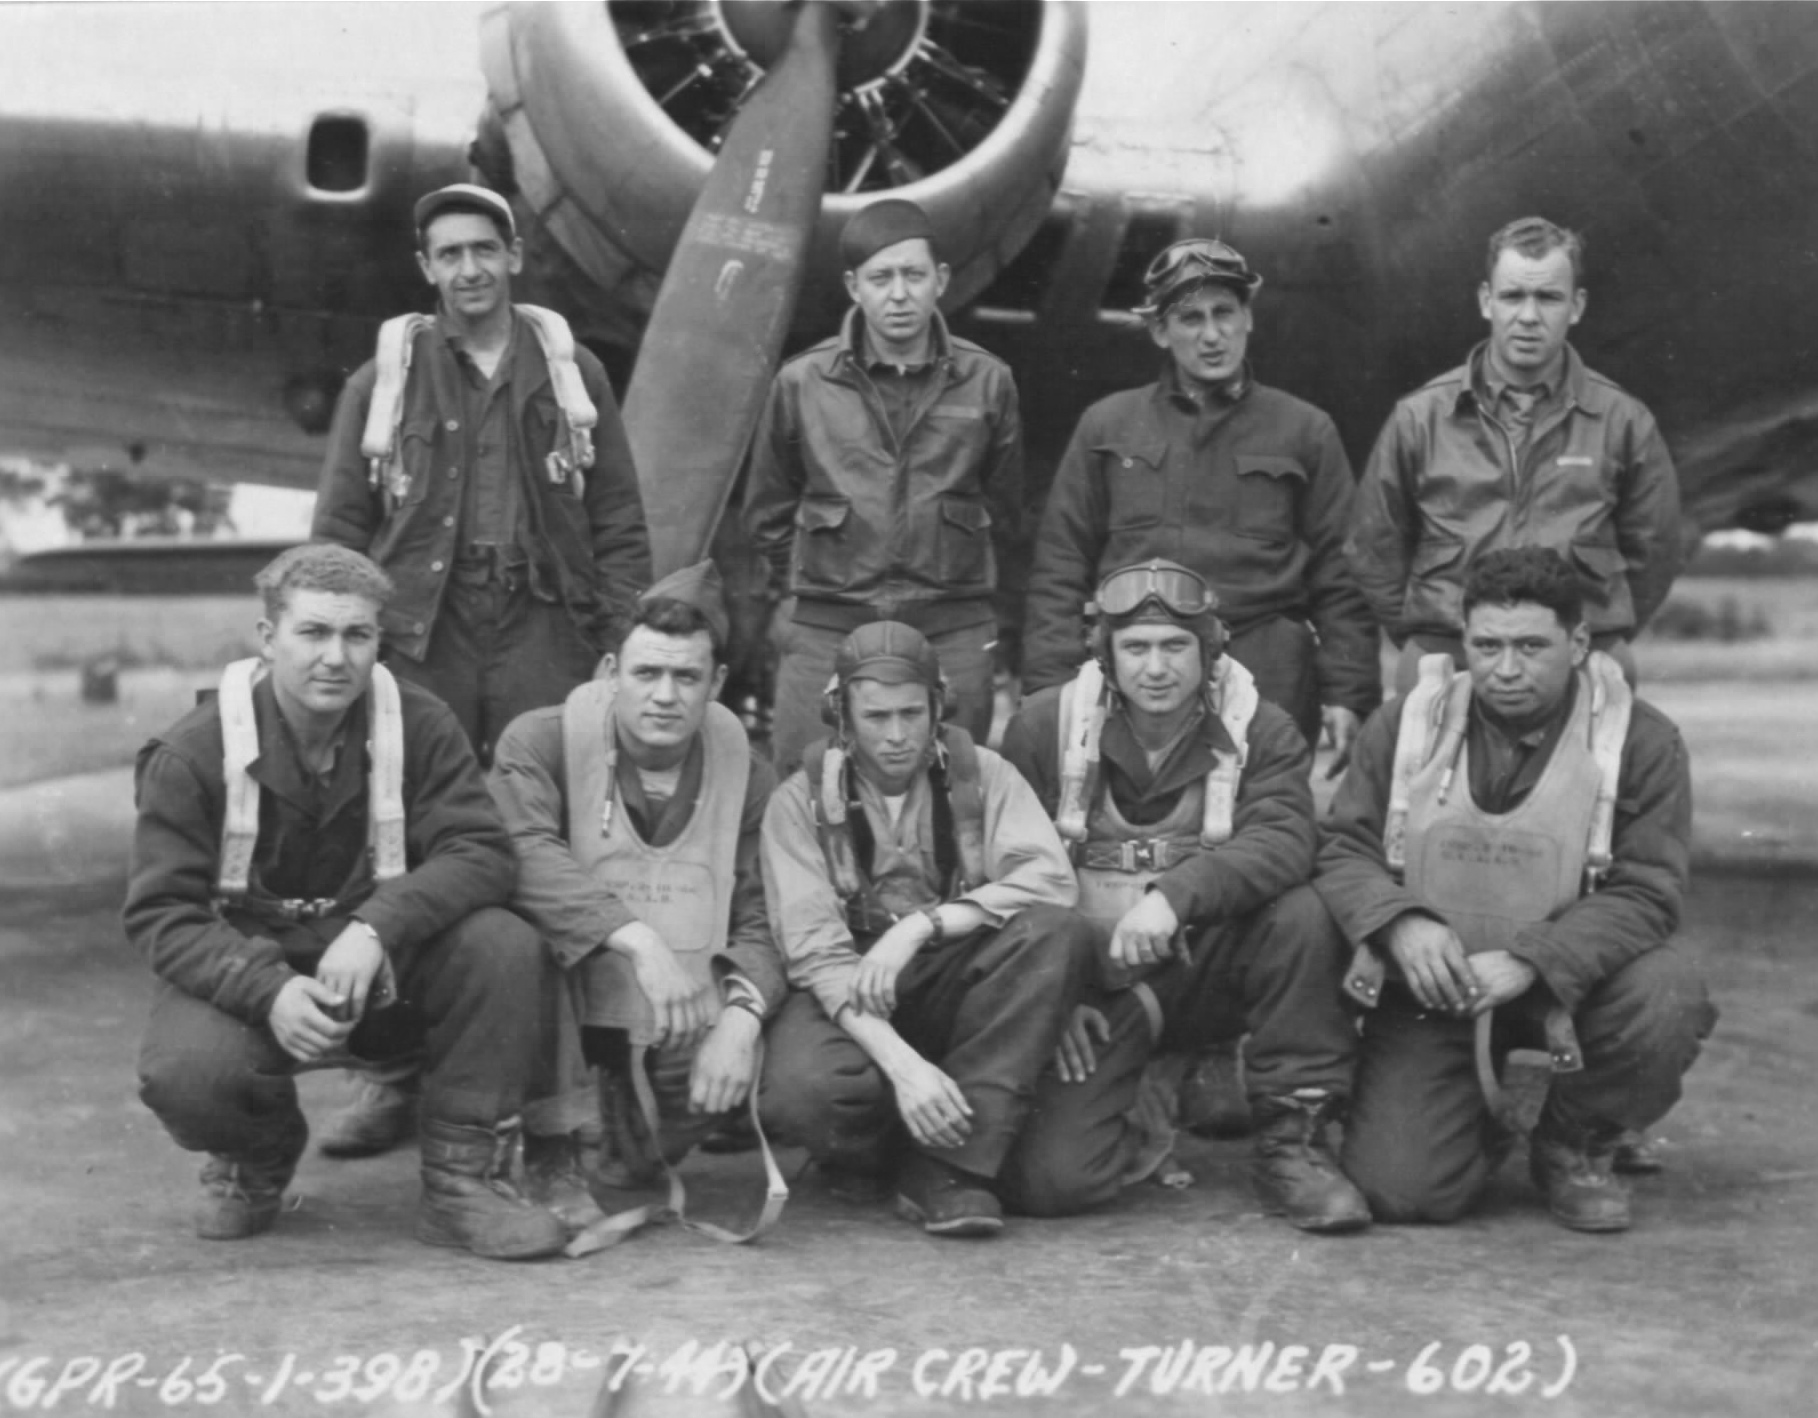 Turner's Crew - 602nd Squadron - 28 July 1944